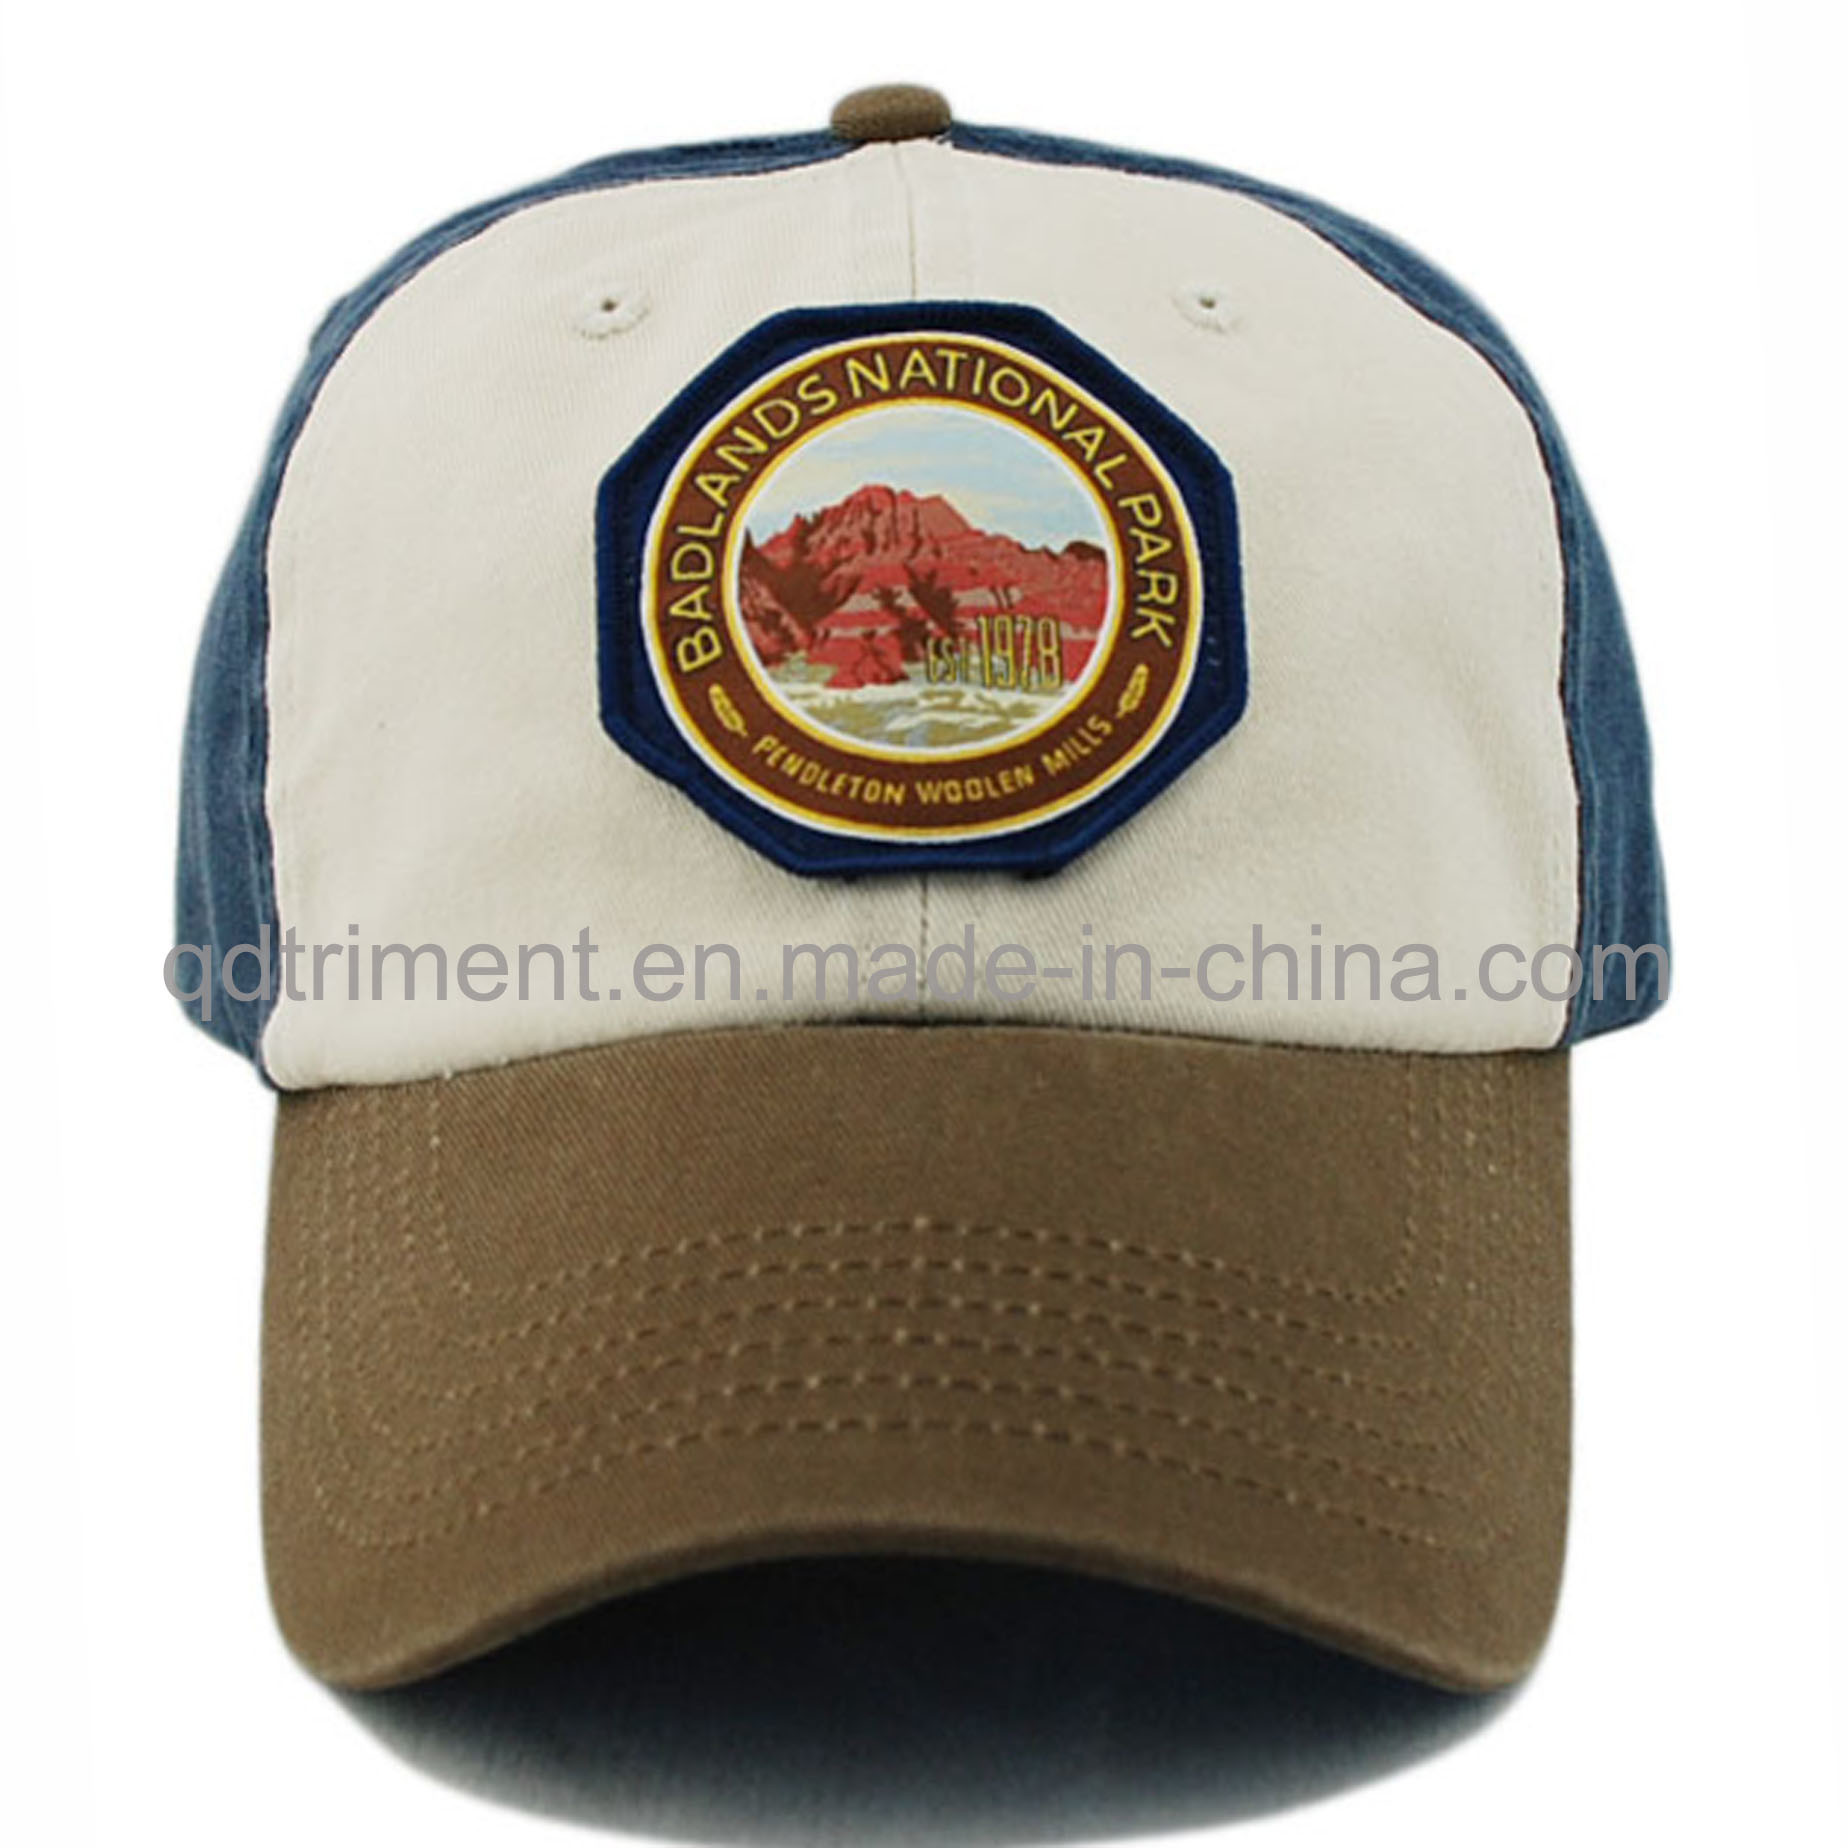 Washed Woven Patched Cotton Twill Sport Baseball Cap (TMB9239)